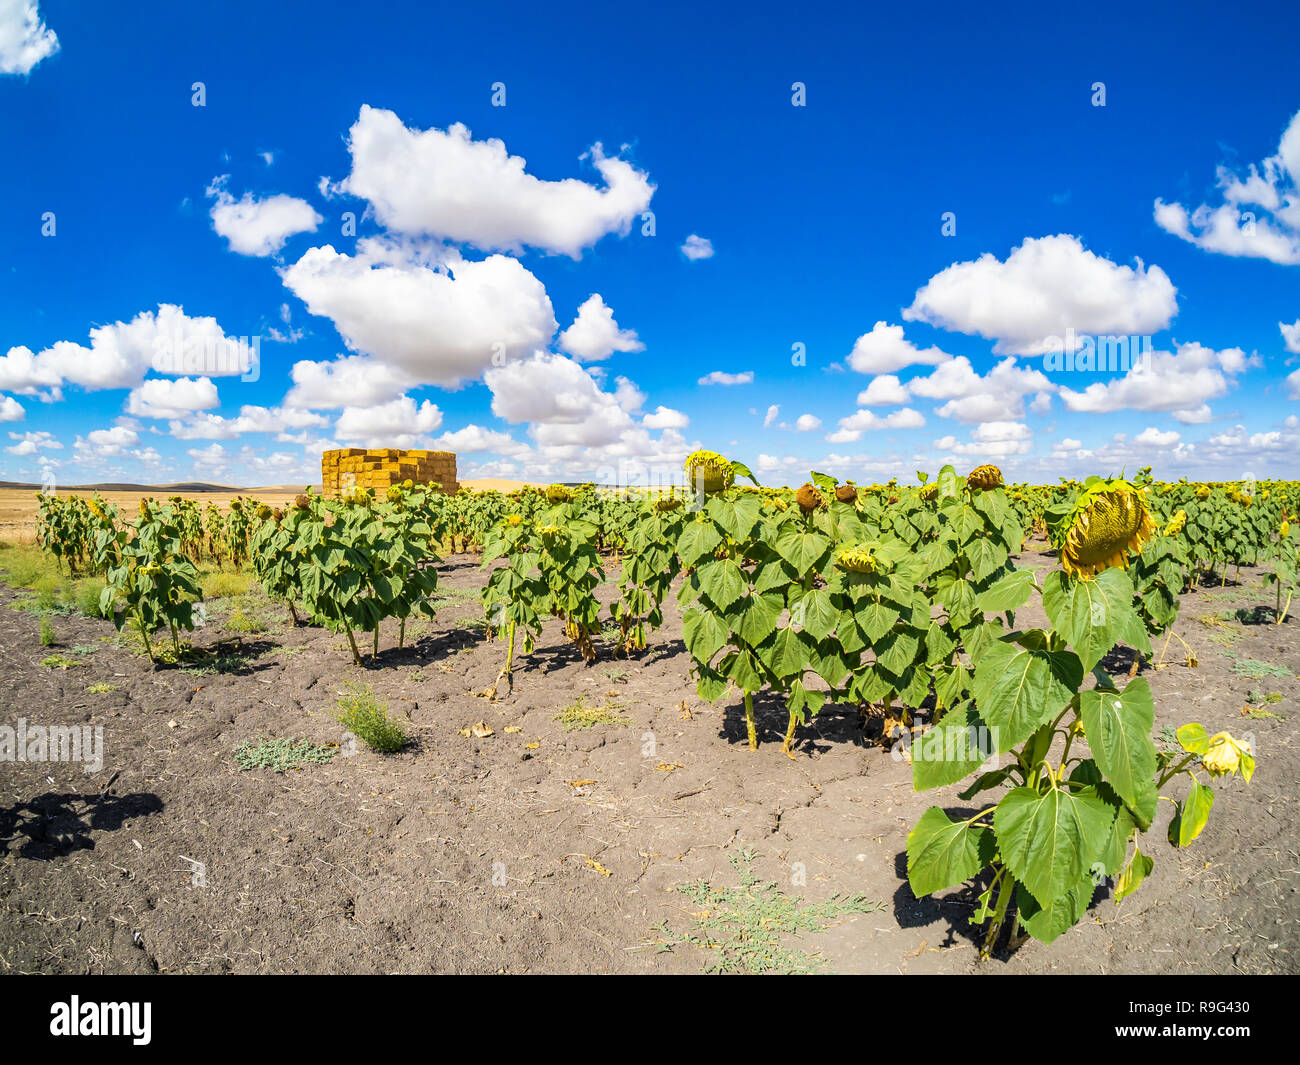 Field of sunflowers in the Sevillian countryside Stock Photo